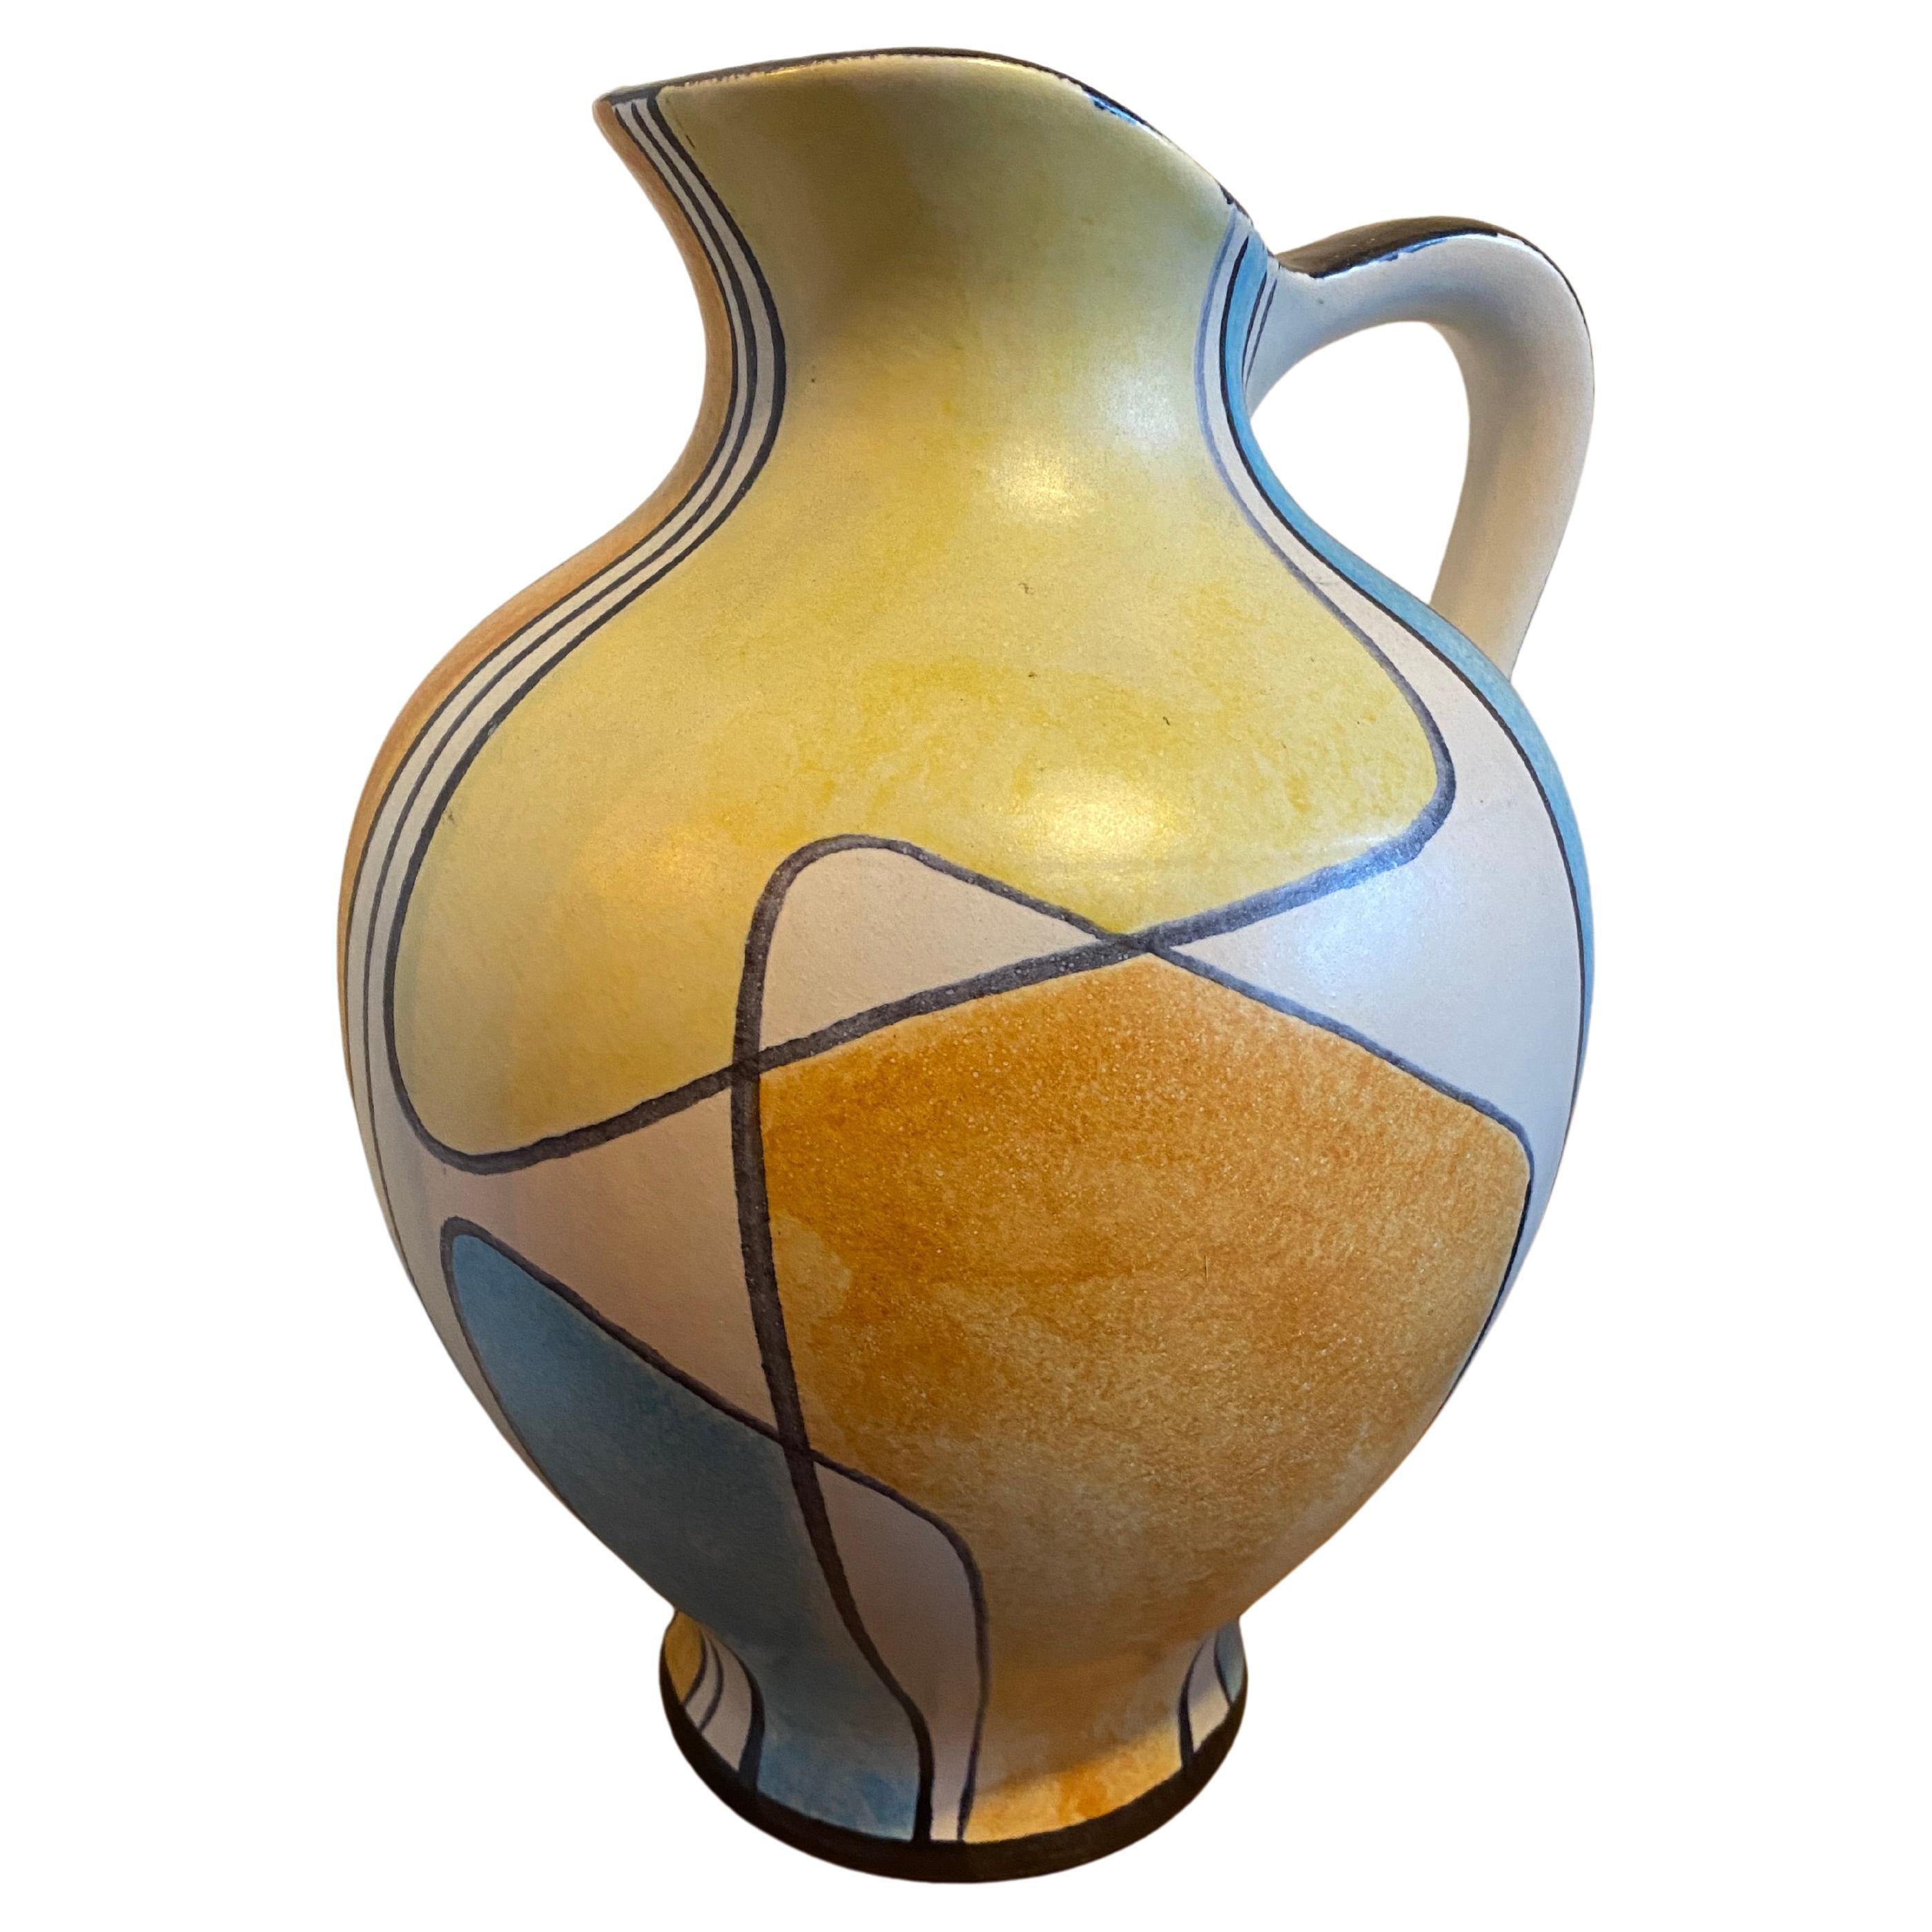 A stunning and rare Bay Keramik floor vase designed by renowned designer Bodo Mans. The decor or pattern is 'Haiti' (1959).

BAY Keramik was founded in 1934 by Eduard Bay. At the early 1960s BAY was a leading manufacturer of art ceramics.

Designer: